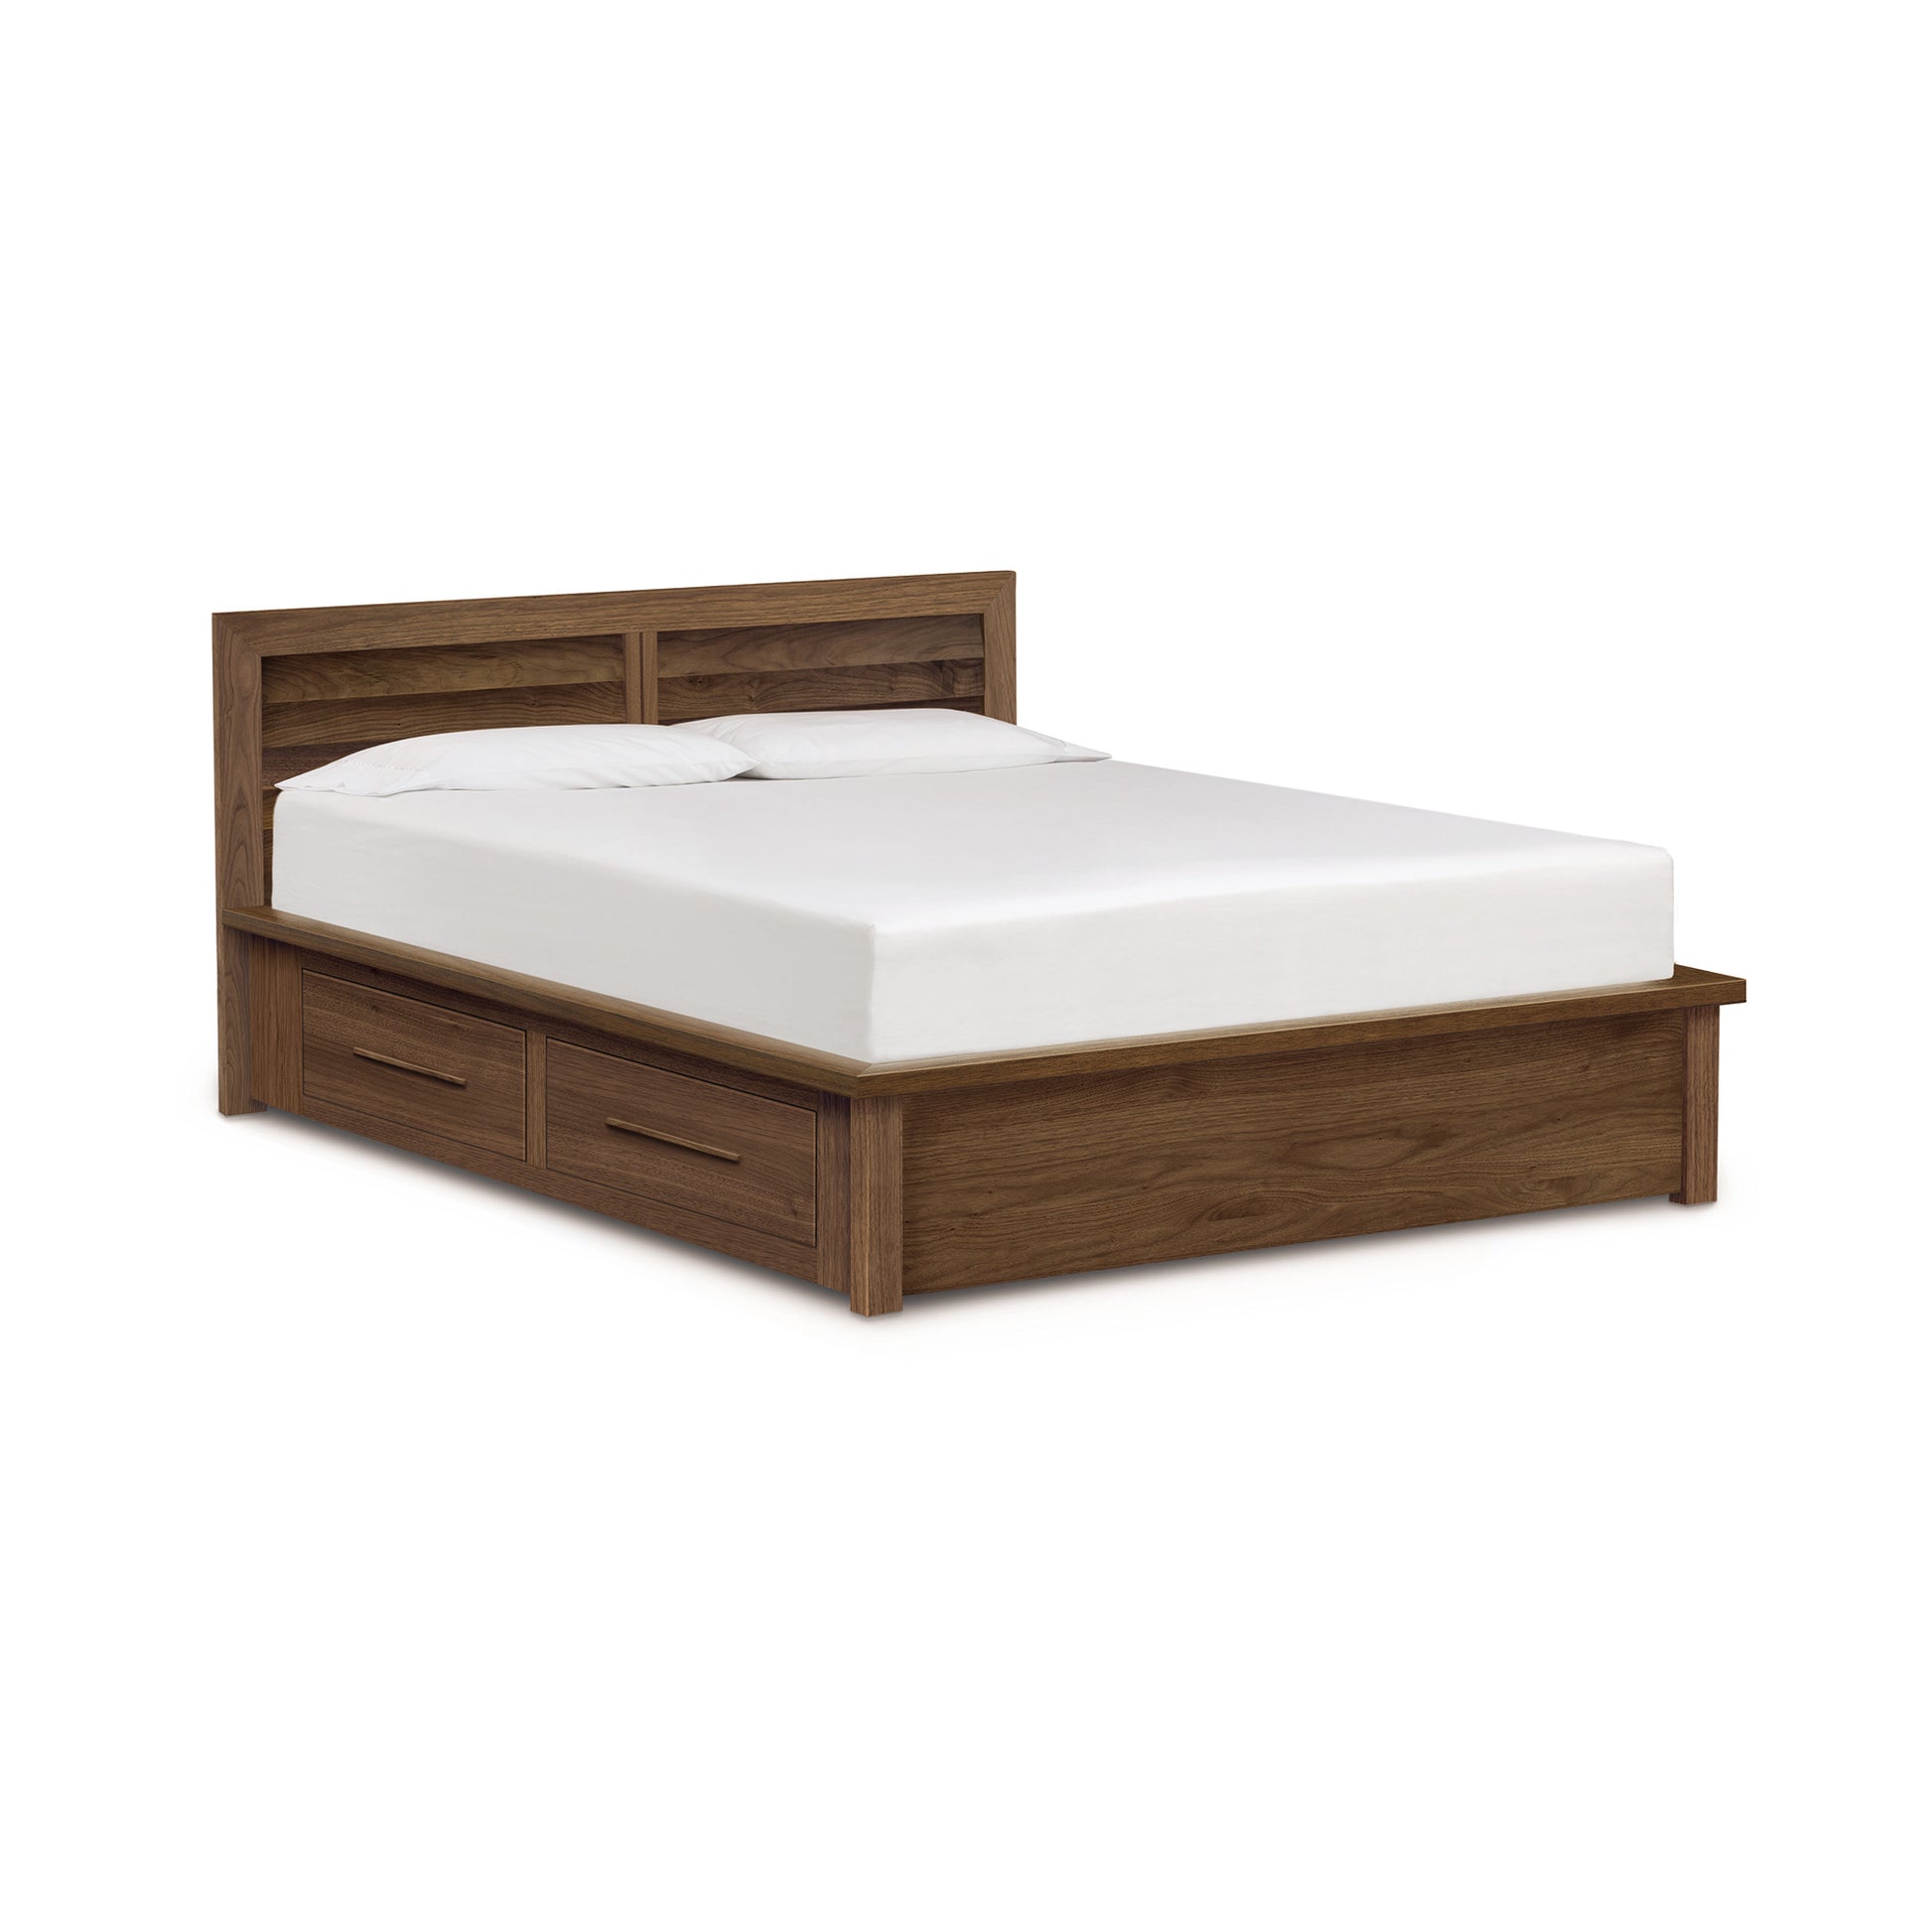 A wooden queen-sized Copeland Furniture Moduluxe Storage Bed with Clapboard Headboard - 35" Series and a white mattress and built-in storage drawers, isolated on a white background.